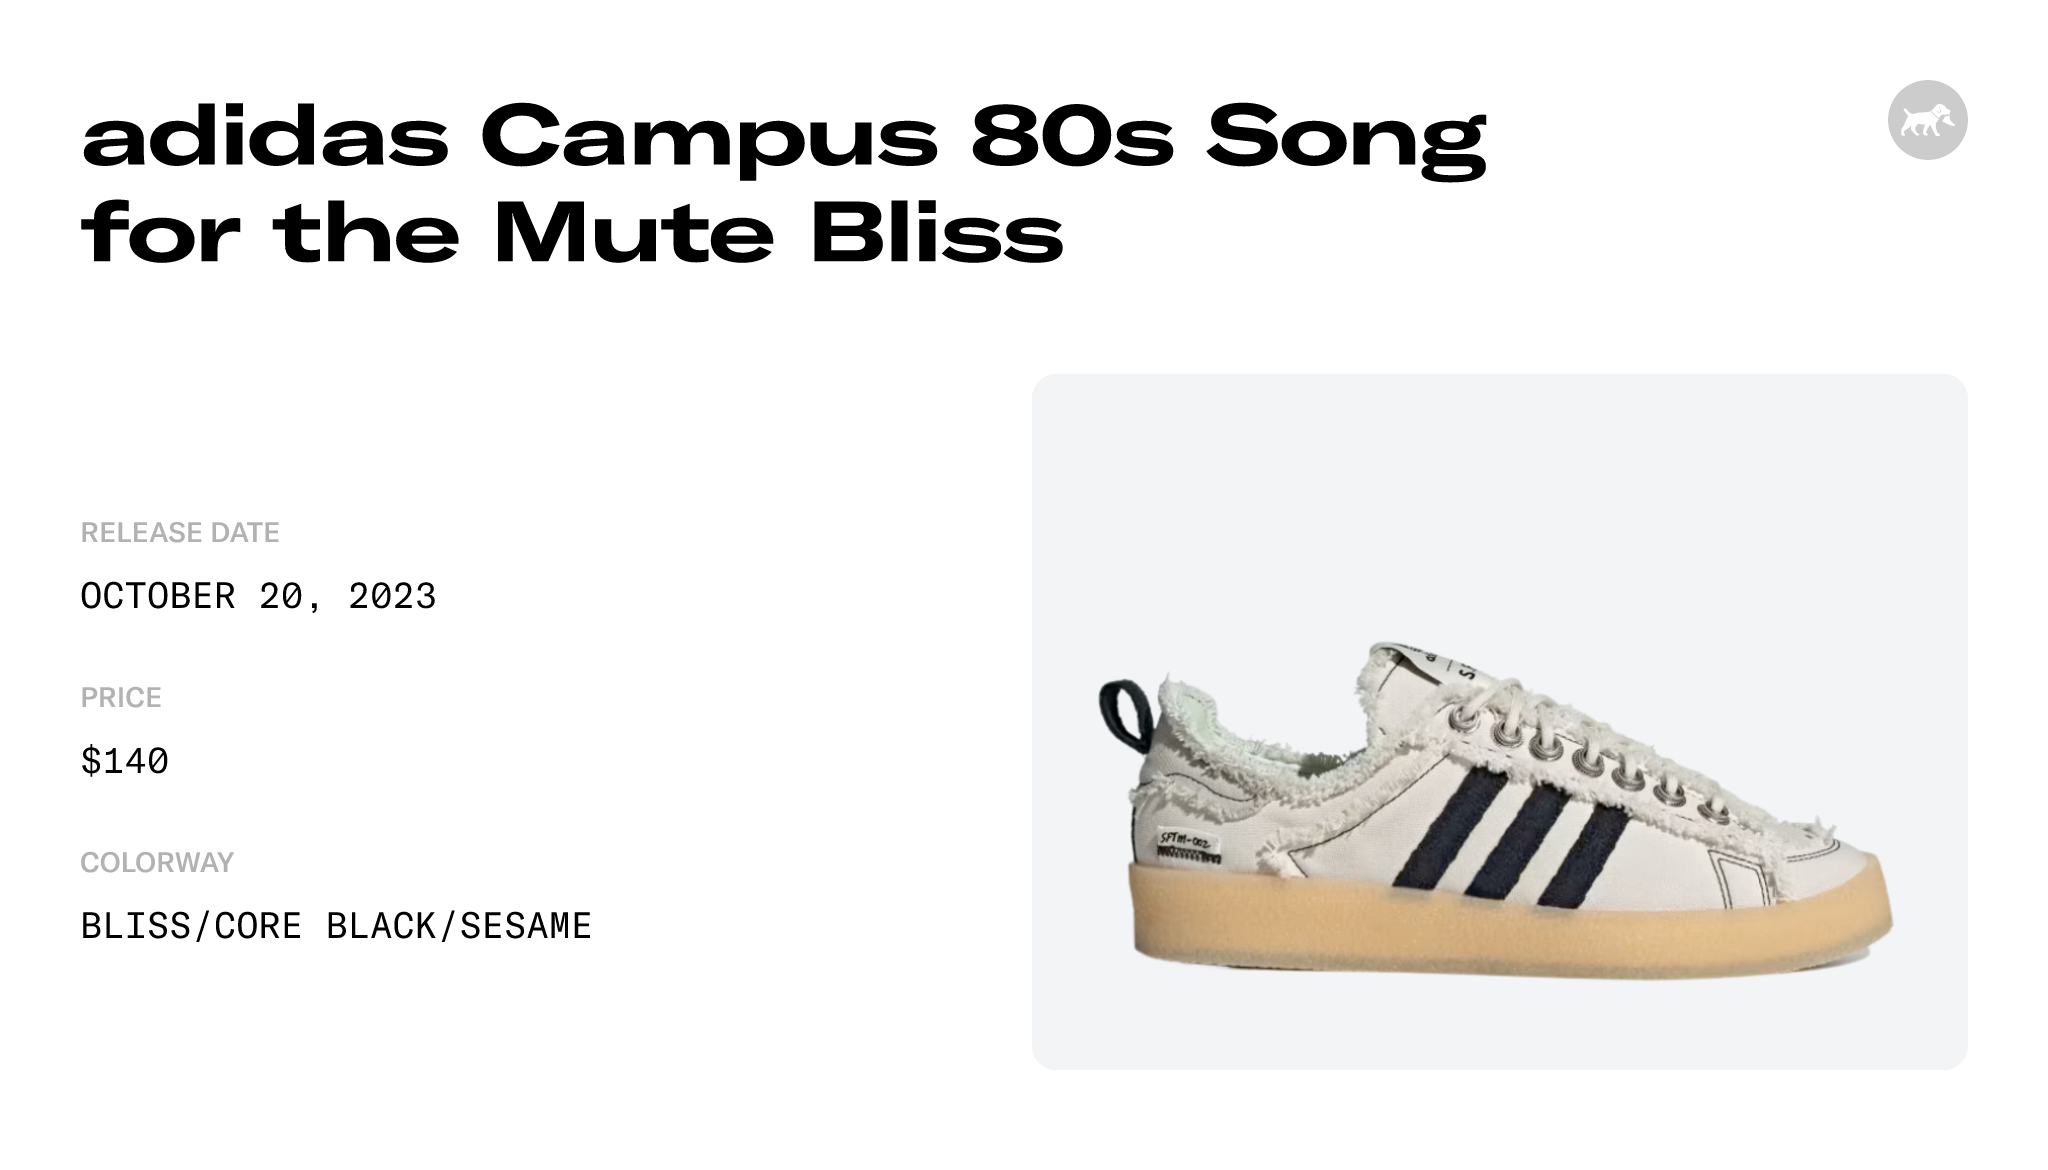 adidas Campus 80s Song for the Mute Bliss - ID4818 Raffles and Release Date